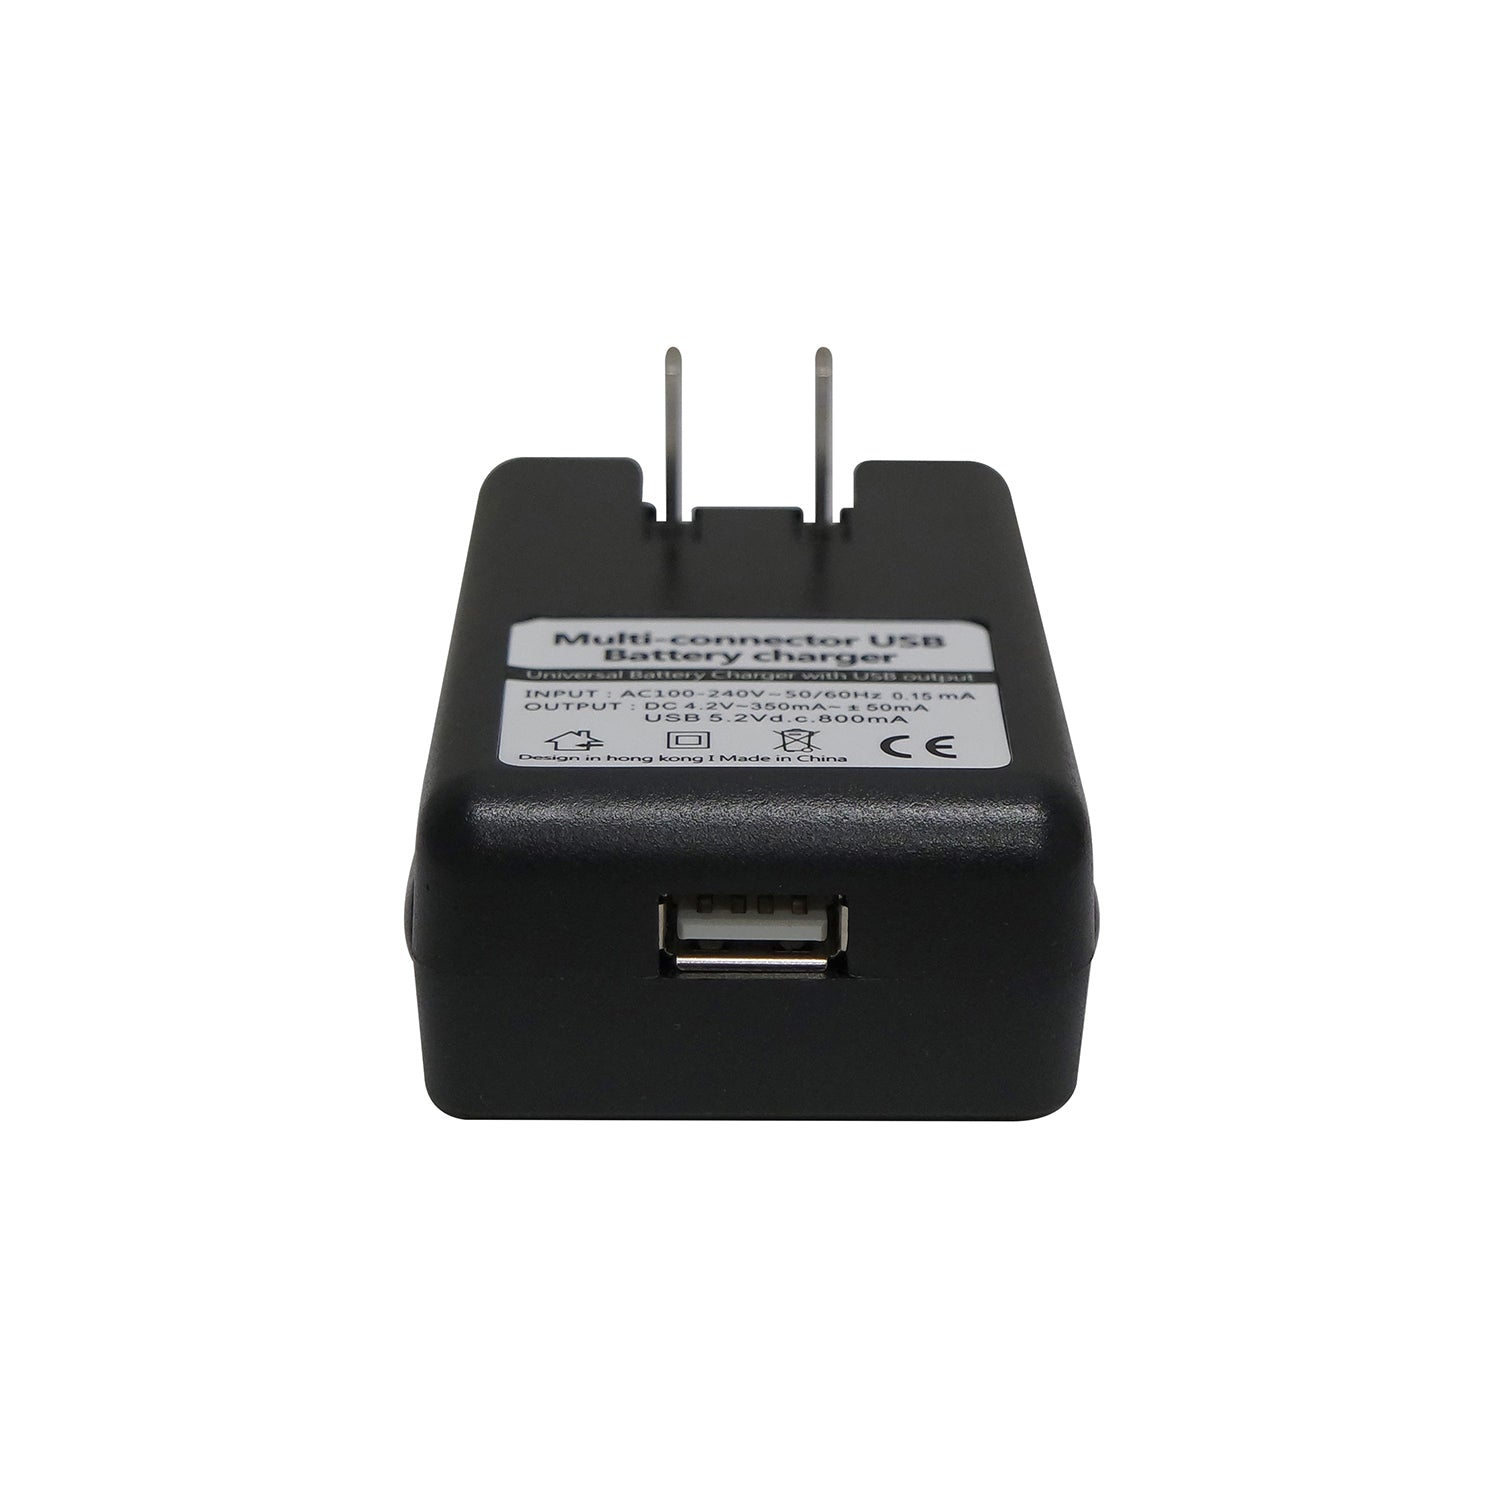 Charger Cradle for Scepter Battery -Data Collectors- eGPS Solutions Inc.